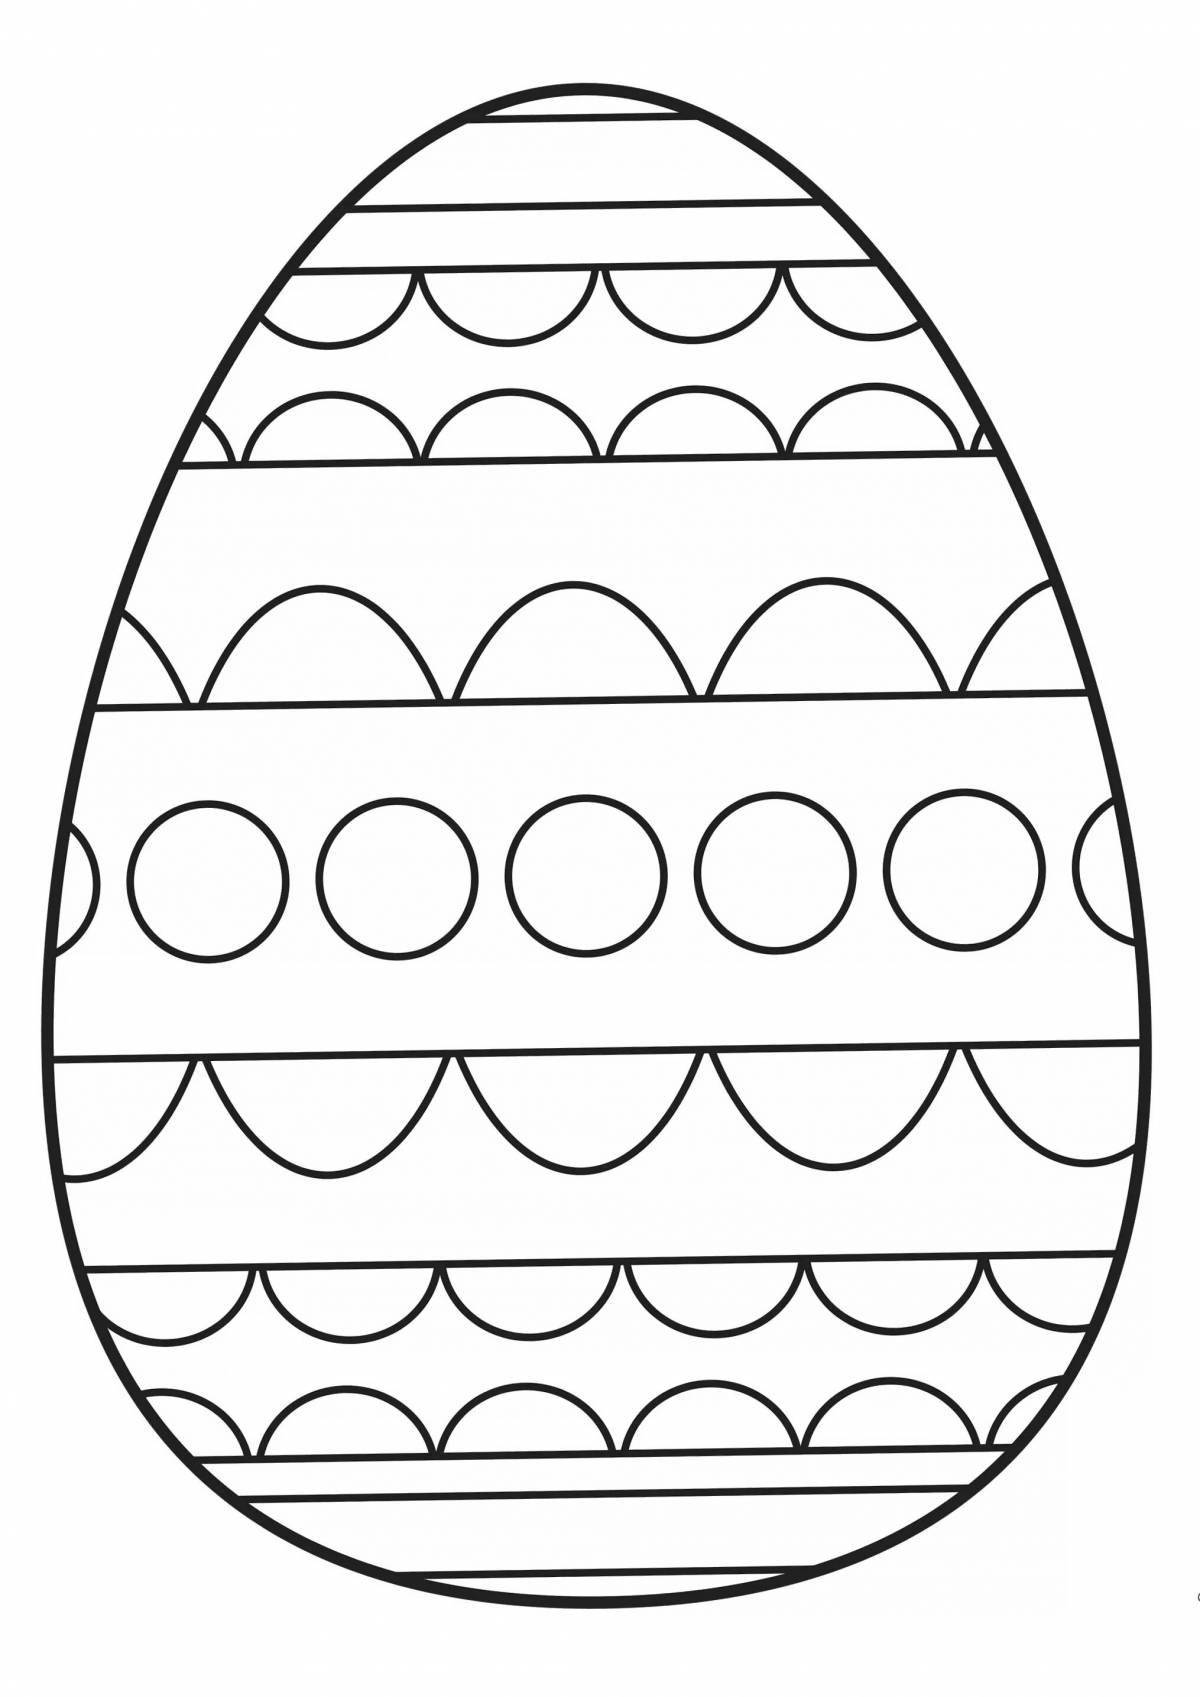 Glowing Easter egg coloring book for kids